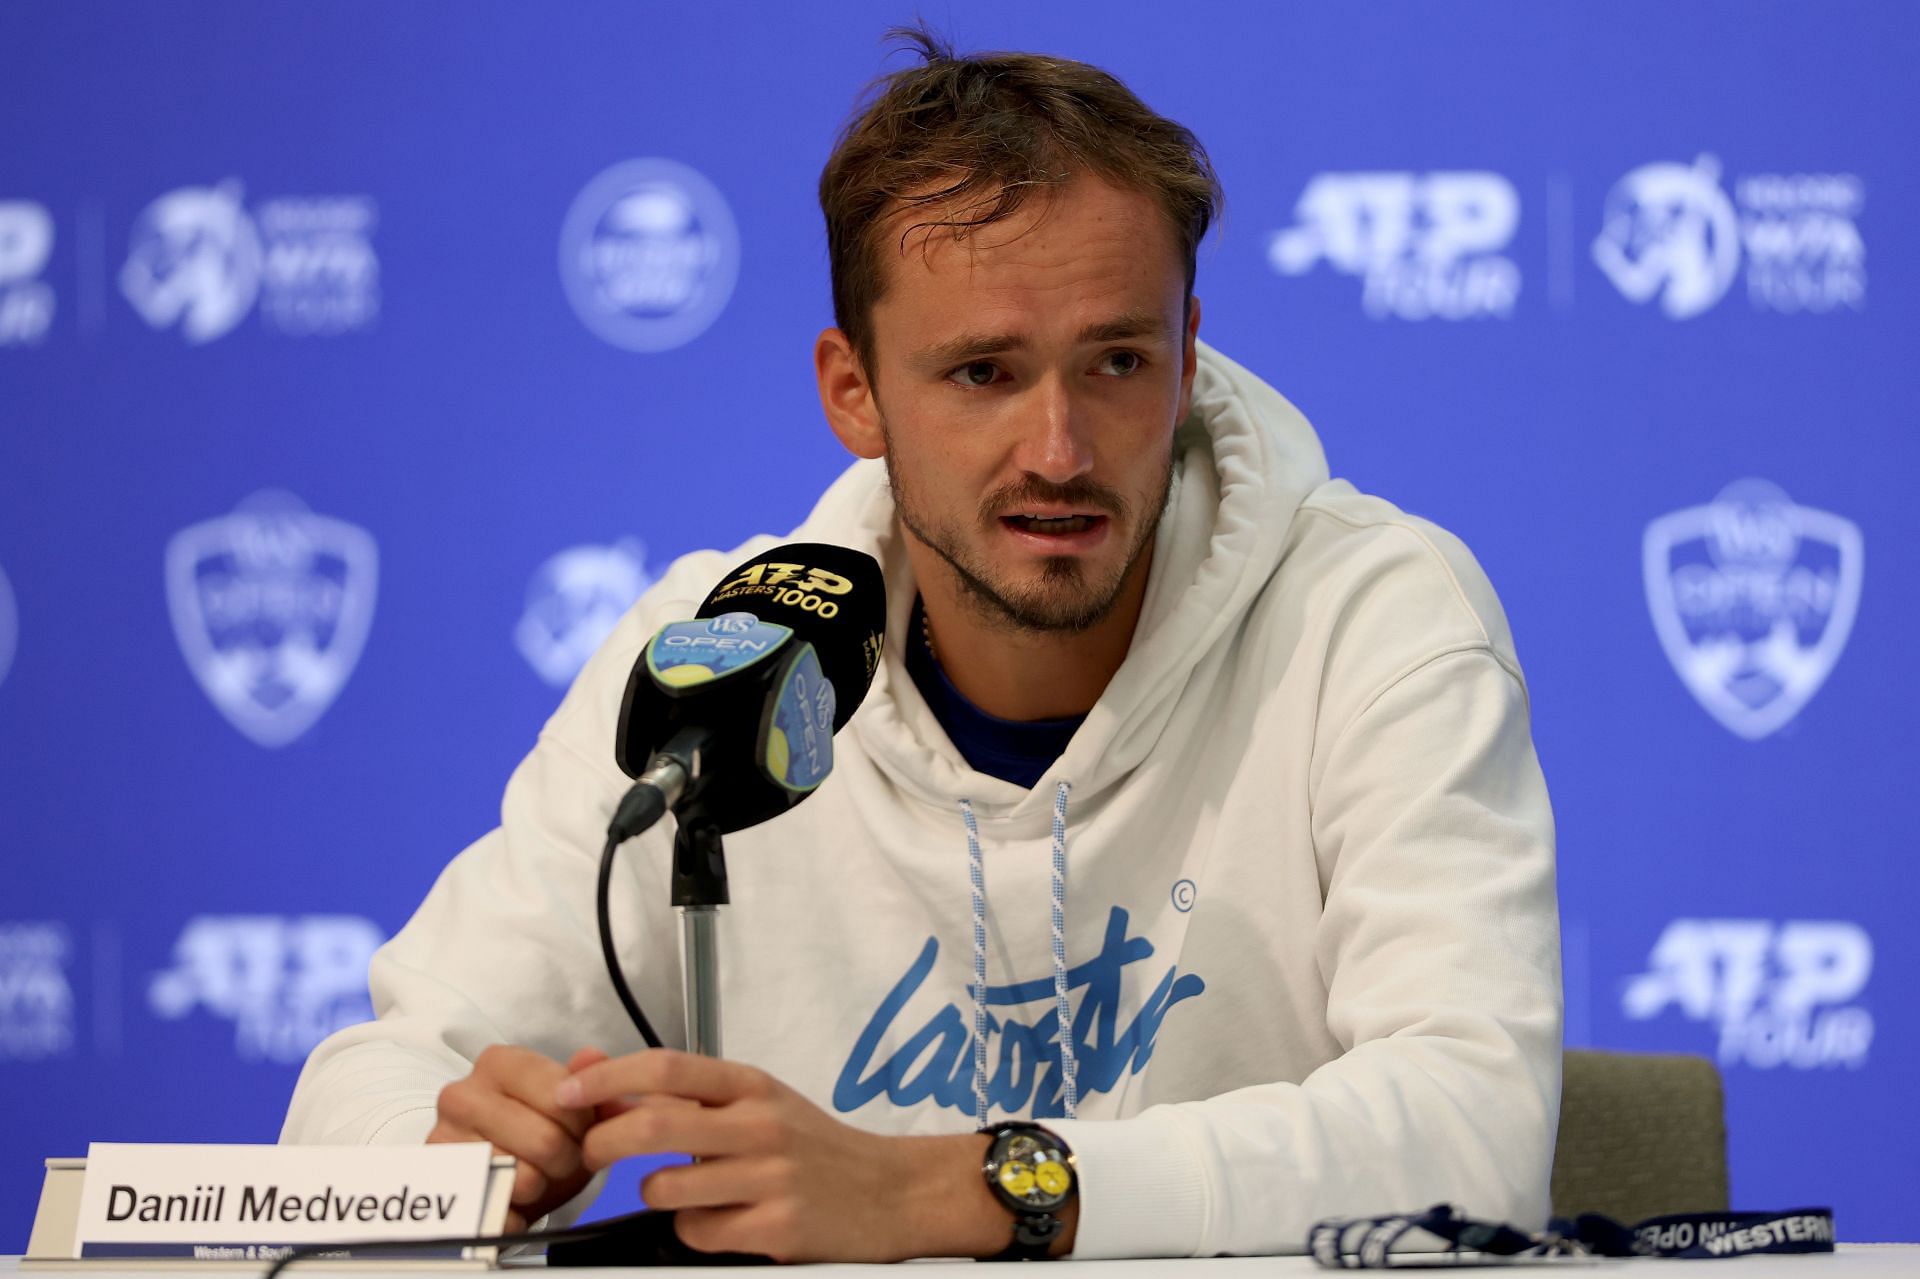 Daniil Medvedev has had an up-and-down campaign